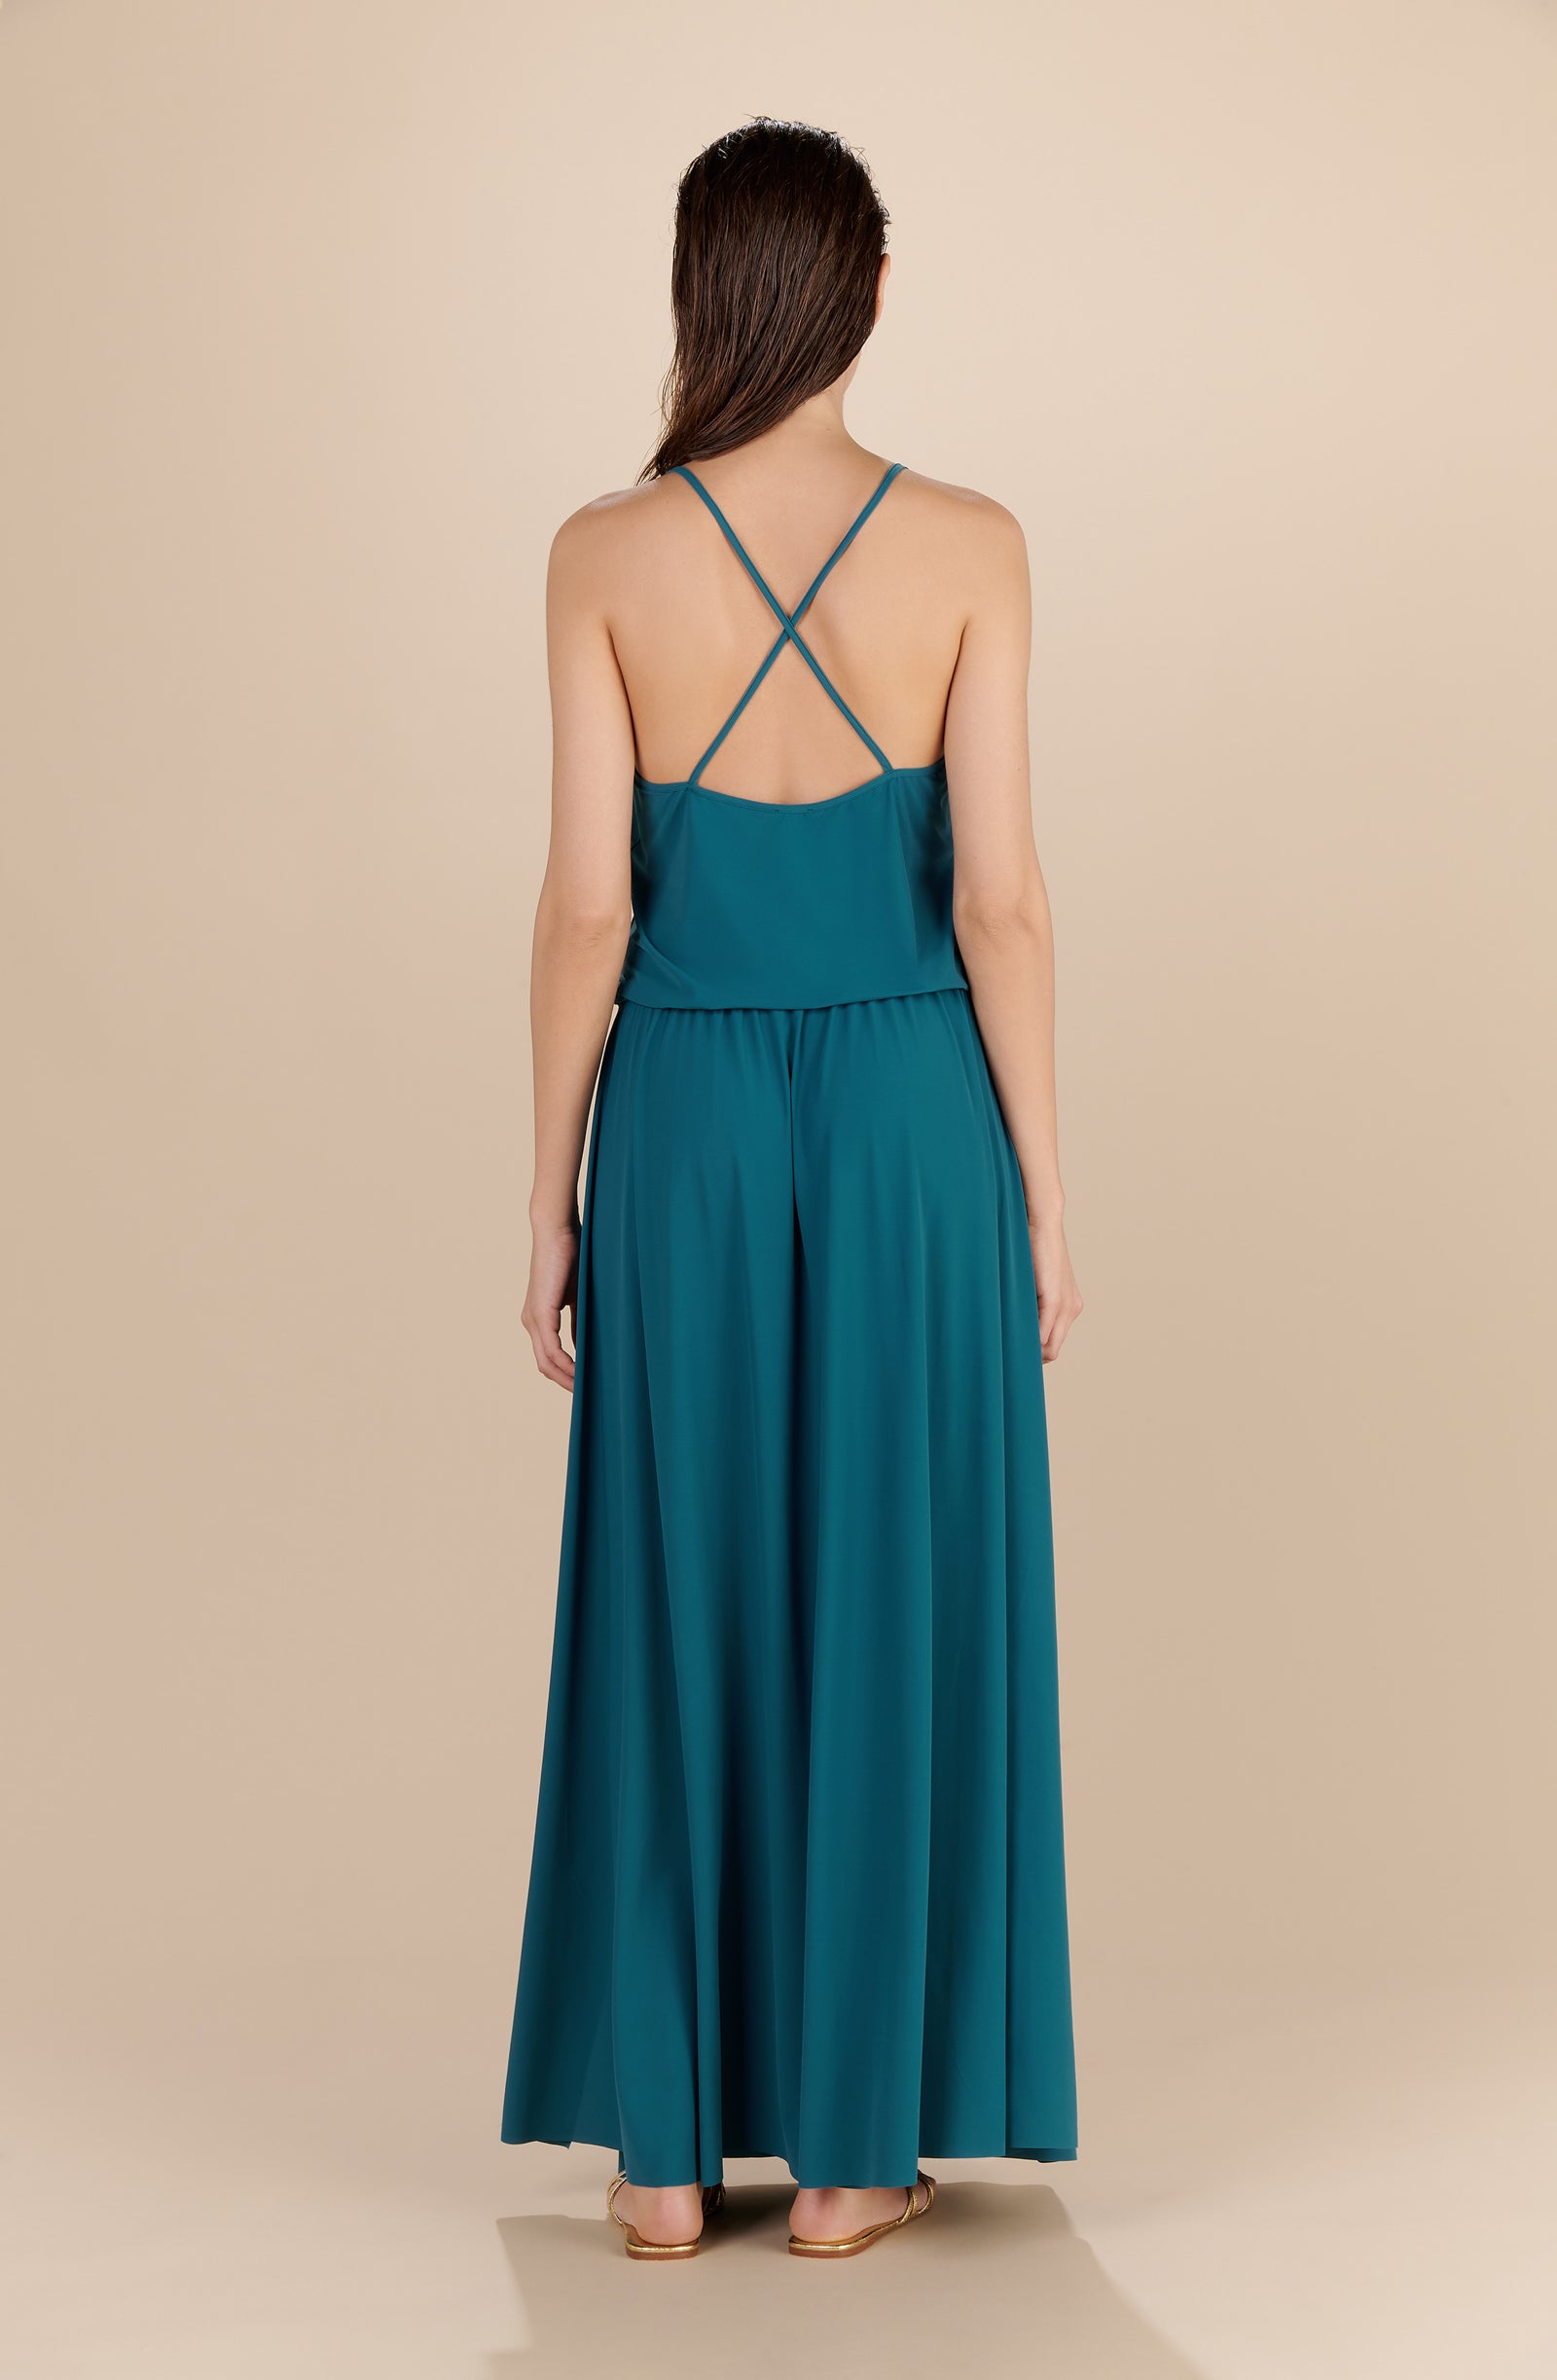 maeve - Long Persian blue dress with crossed straps at the back